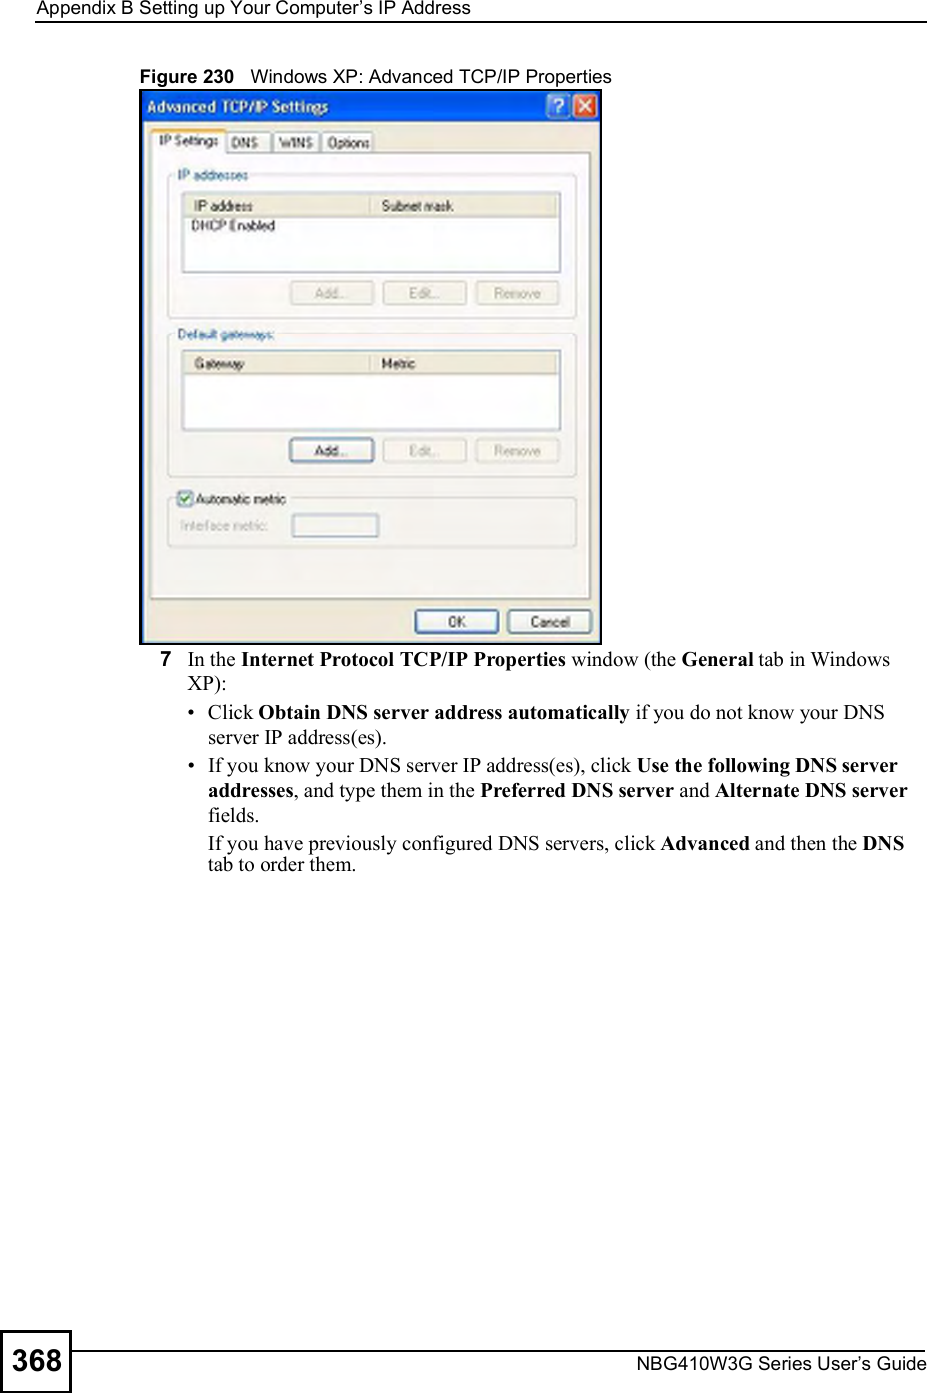 Appendix BSetting up Your Computer s IP AddressNBG410W3G Series User s Guide368Figure 230   Windows XP: Advanced TCP/IP Properties7In the Internet Protocol TCP/IP Properties window (the General tab in Windows XP): Click Obtain DNS server address automatically if you do not know your DNS server IP address(es). If you know your DNS server IP address(es), click Use the following DNS server addresses, and type them in the Preferred DNS server and Alternate DNS server fields. If you have previously configured DNS servers, click Advanced and then the DNS tab to order them.